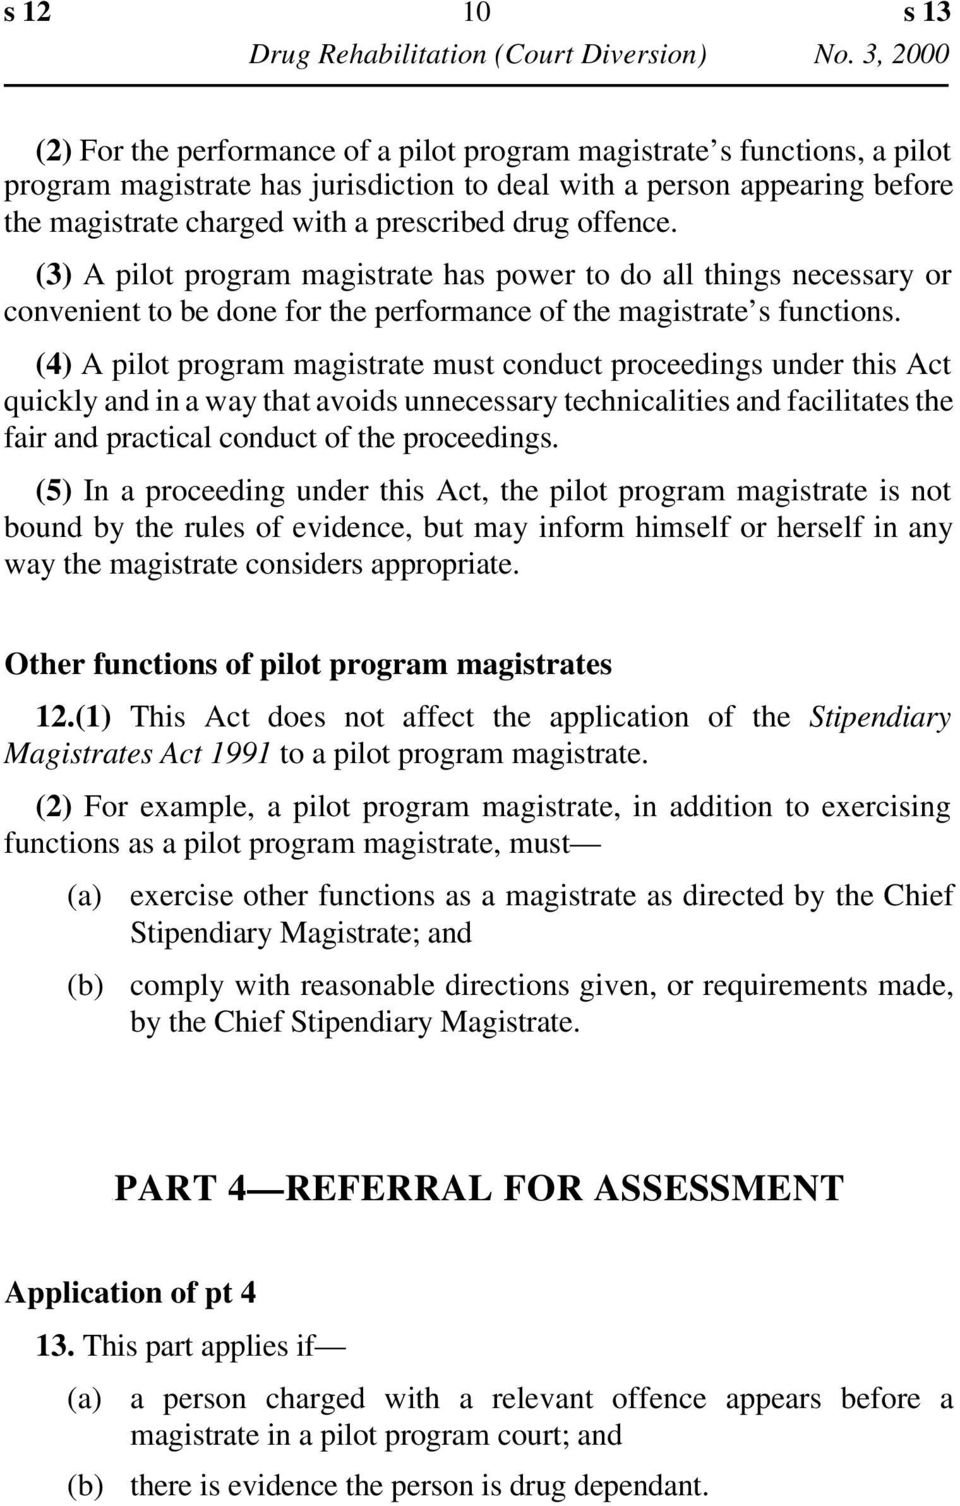 (4) A pilot program magistrate must conduct proceedings under this Act quickly and in a way that avoids unnecessary technicalities and facilitates the fair and practical conduct of the proceedings.